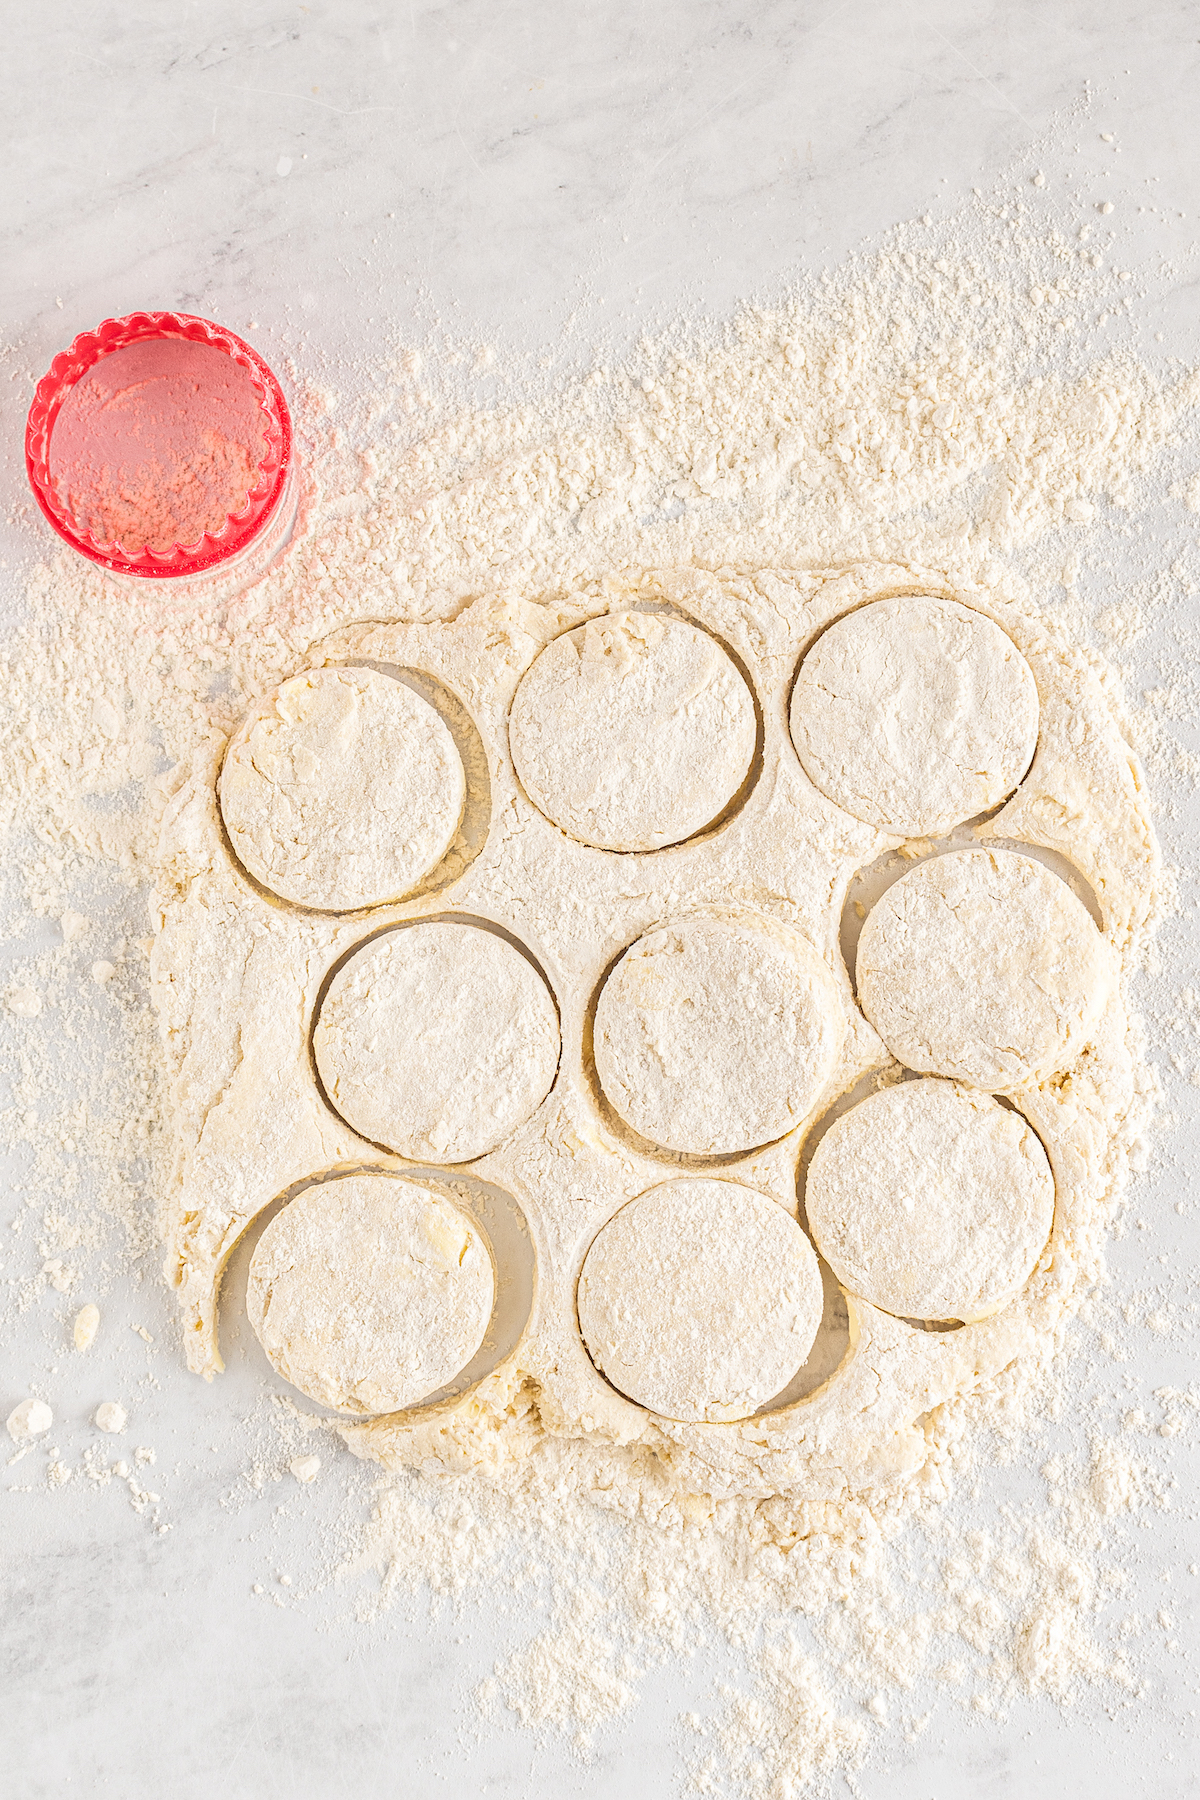 An uneven rectangle of dough on a floured work surface, with round biscuits cut out.